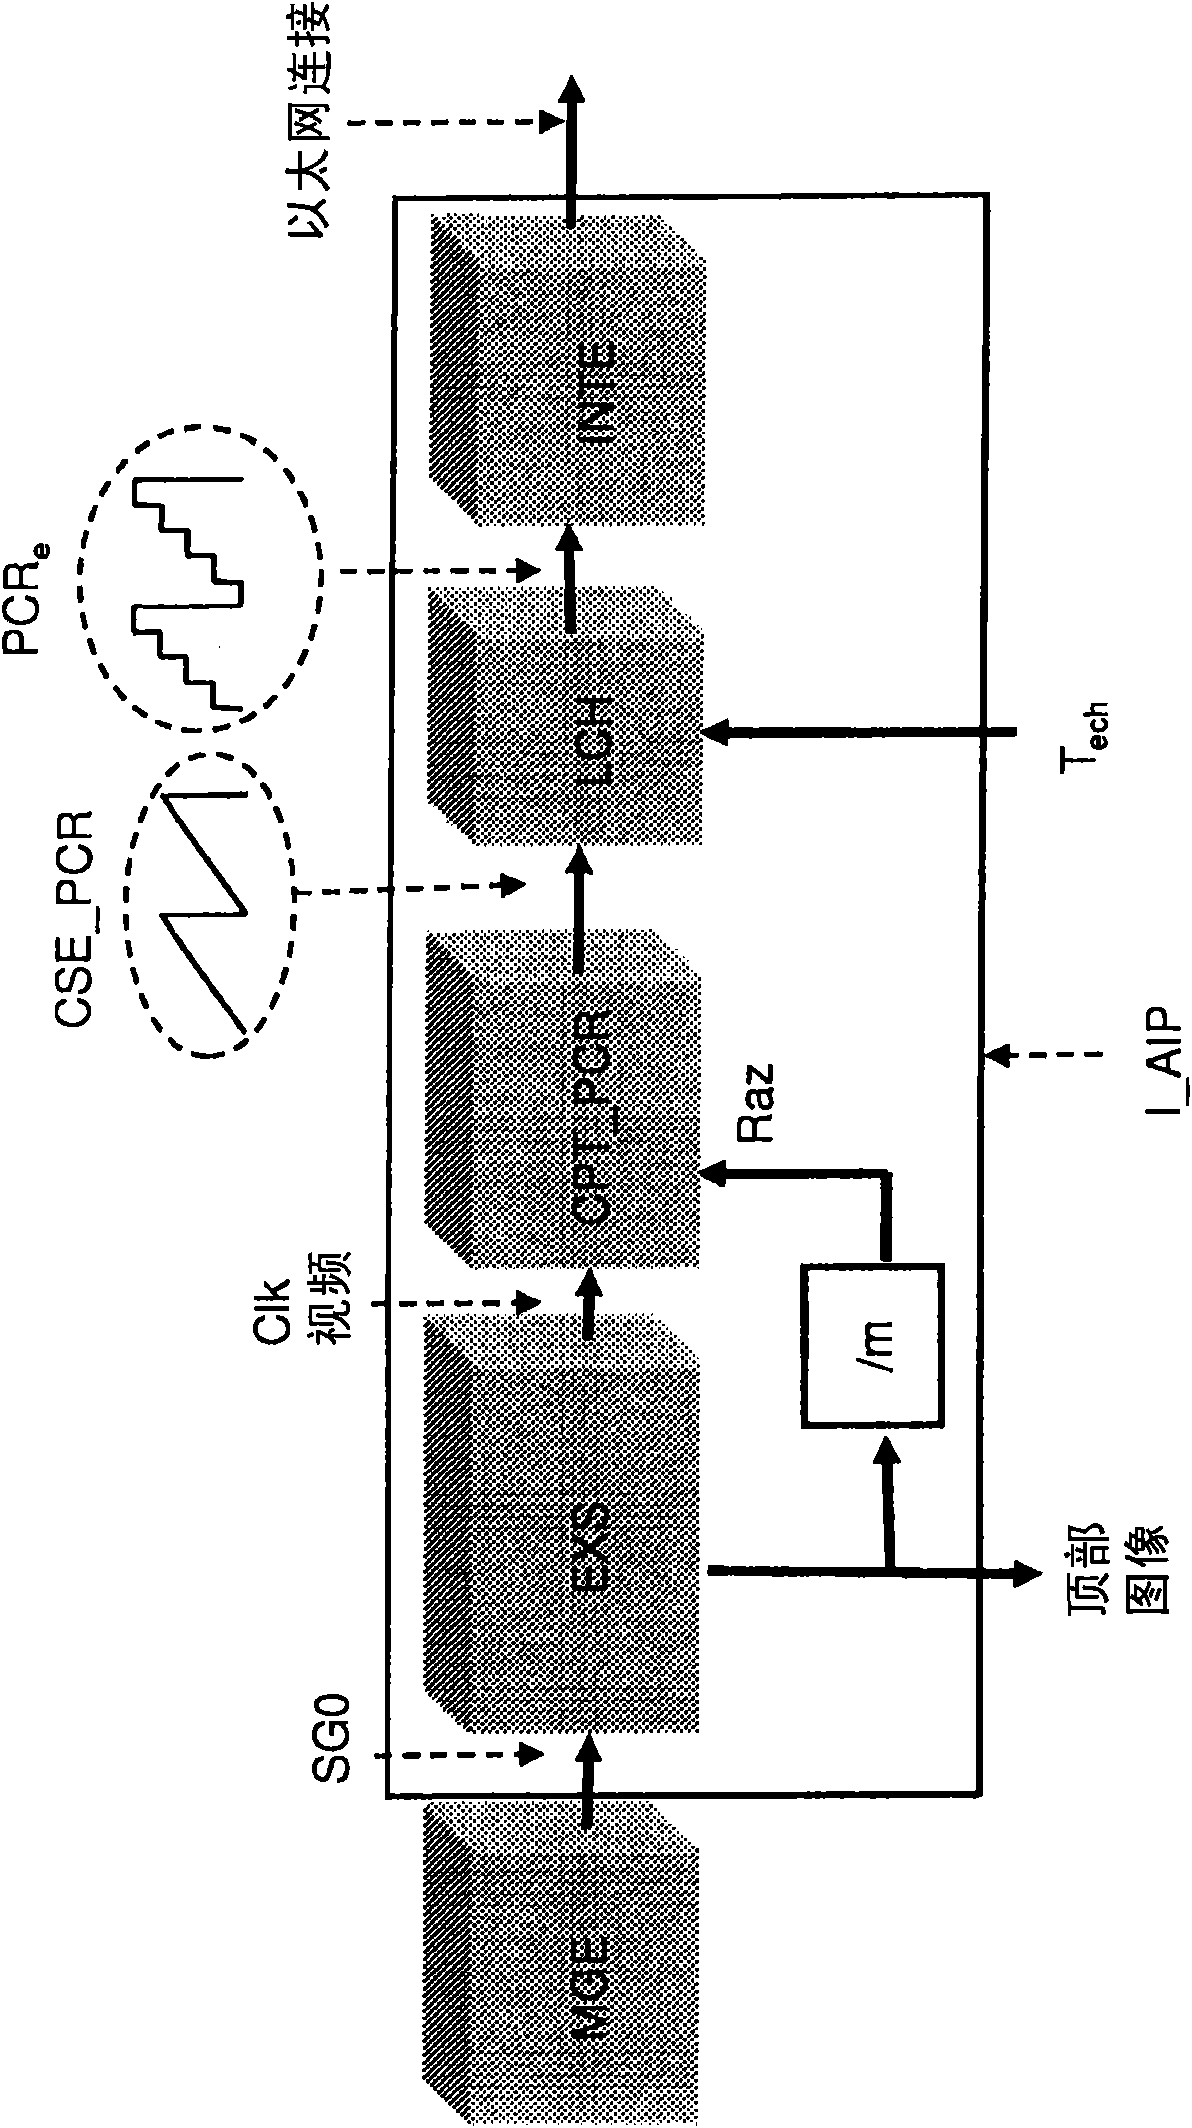 Time labelling associated with an equipment synchronisation system connected to a network